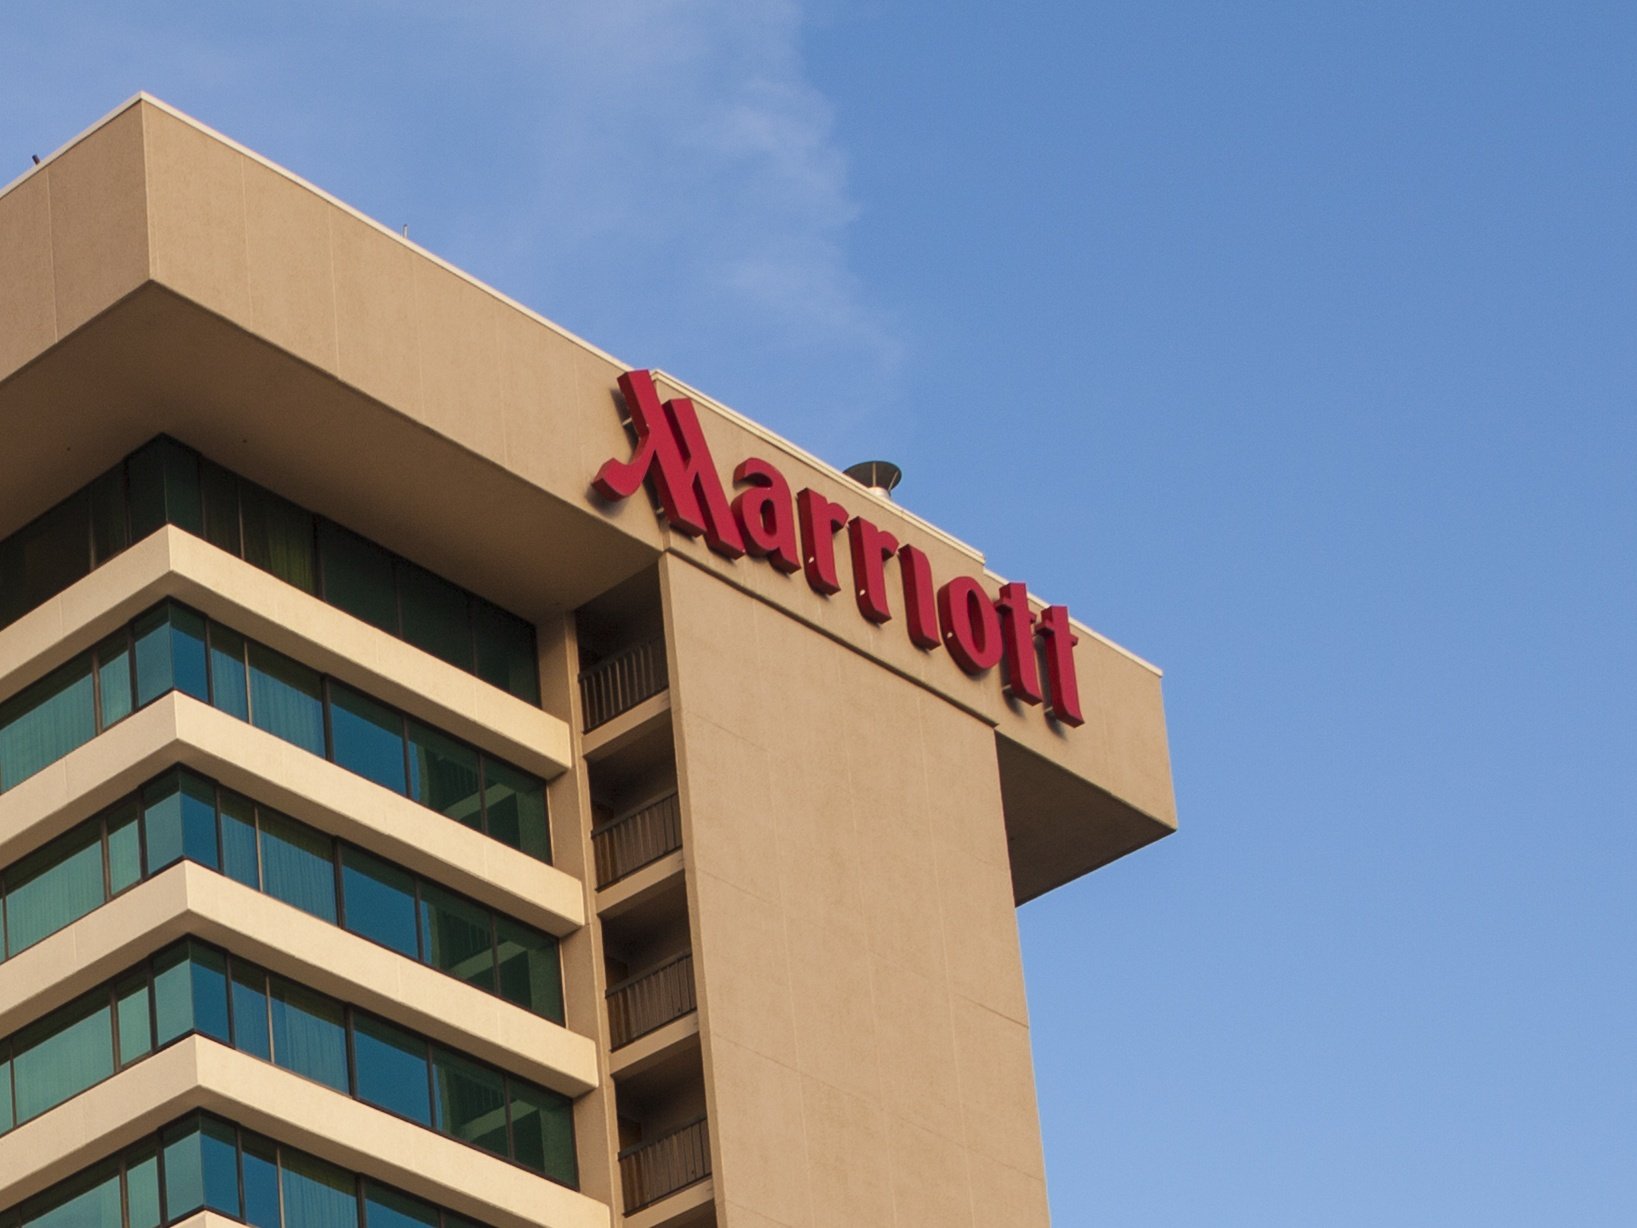 Marriott data breach exposed personal information for 500 million people